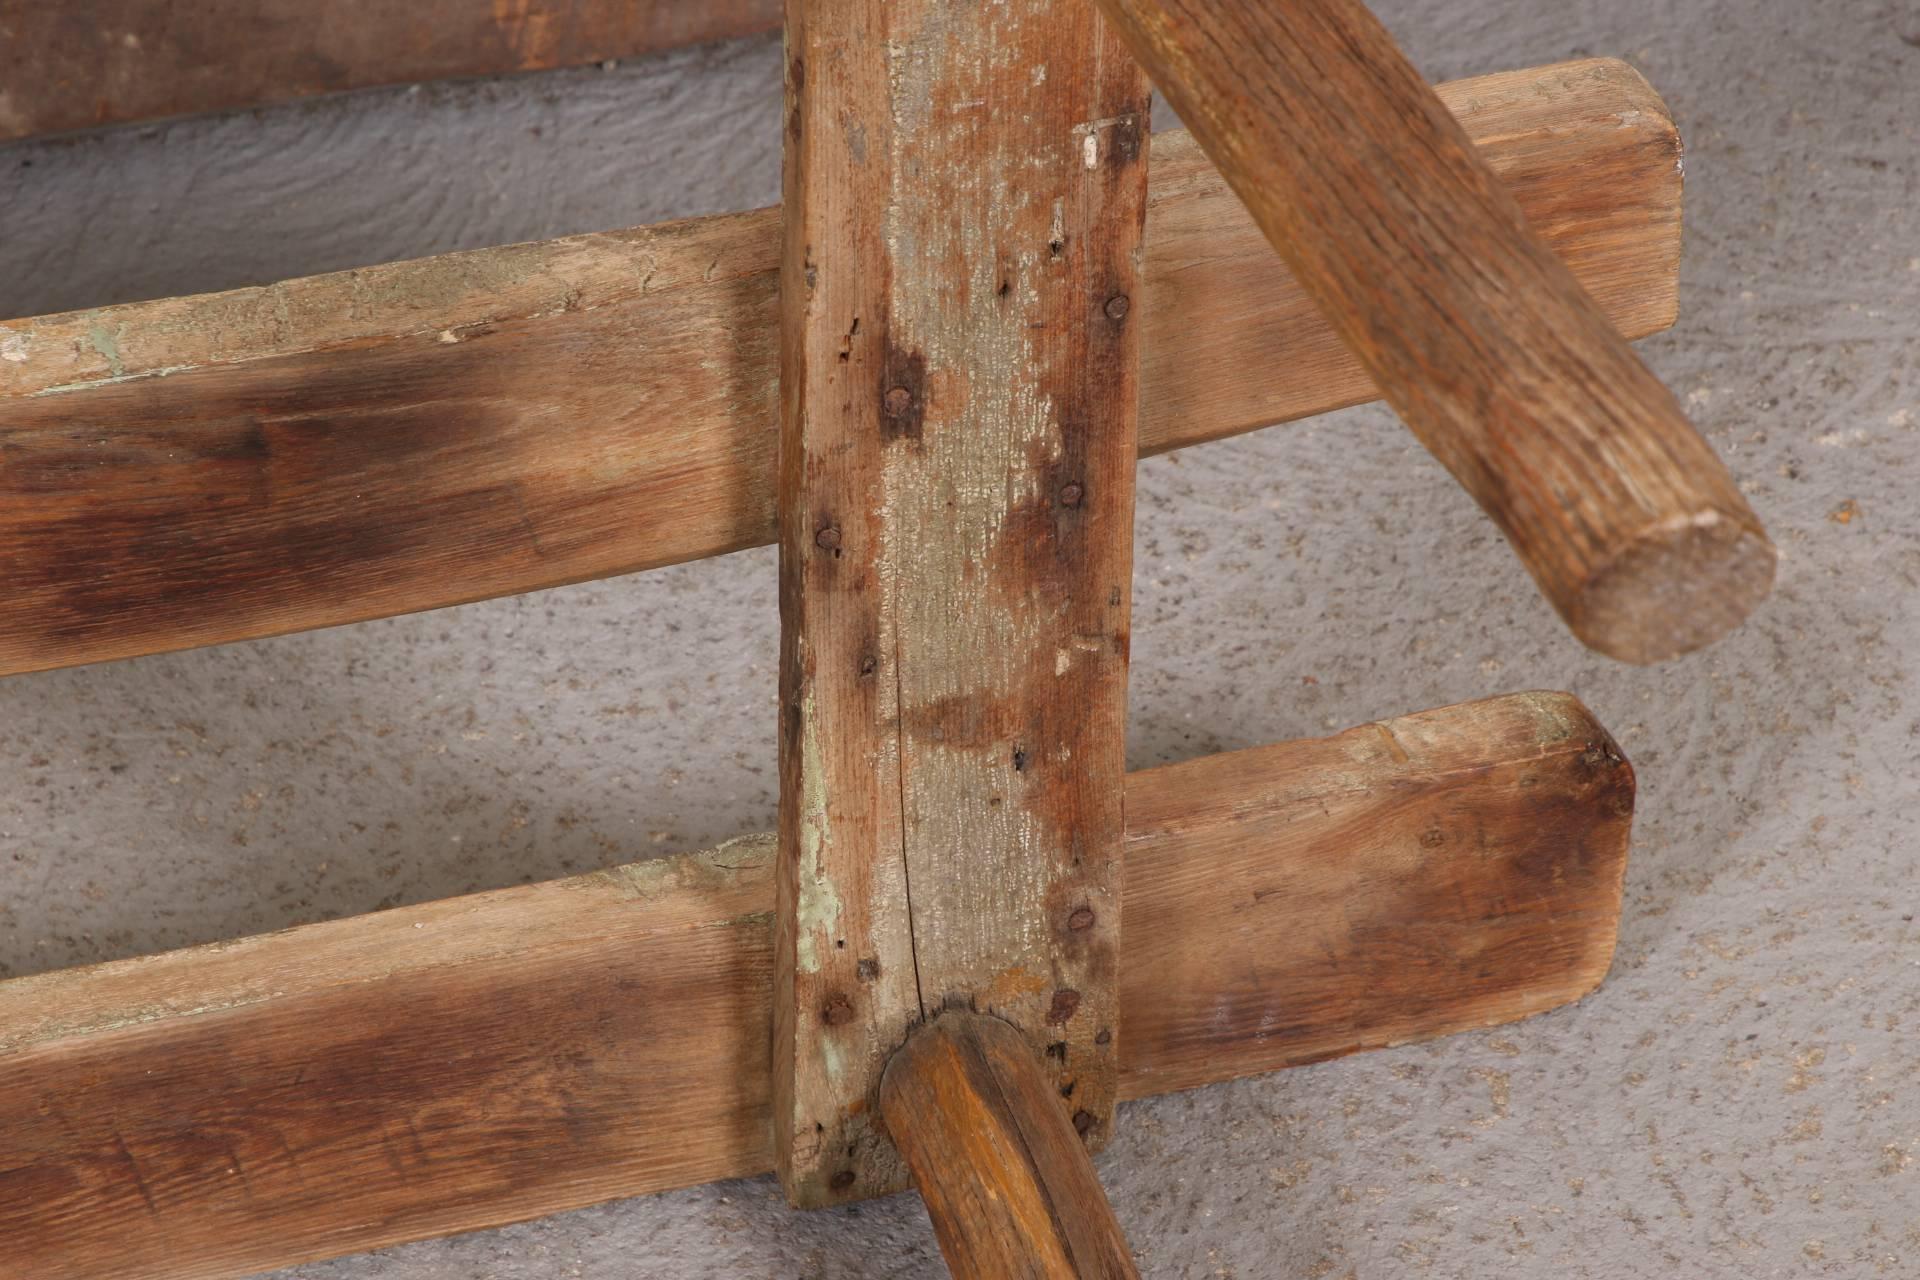 With rough cut cylindrical legs and some traces of old green paint on the top planks. Authentic form with excellent old worn patina.
Condition: worn overall, some warping to the top planks.